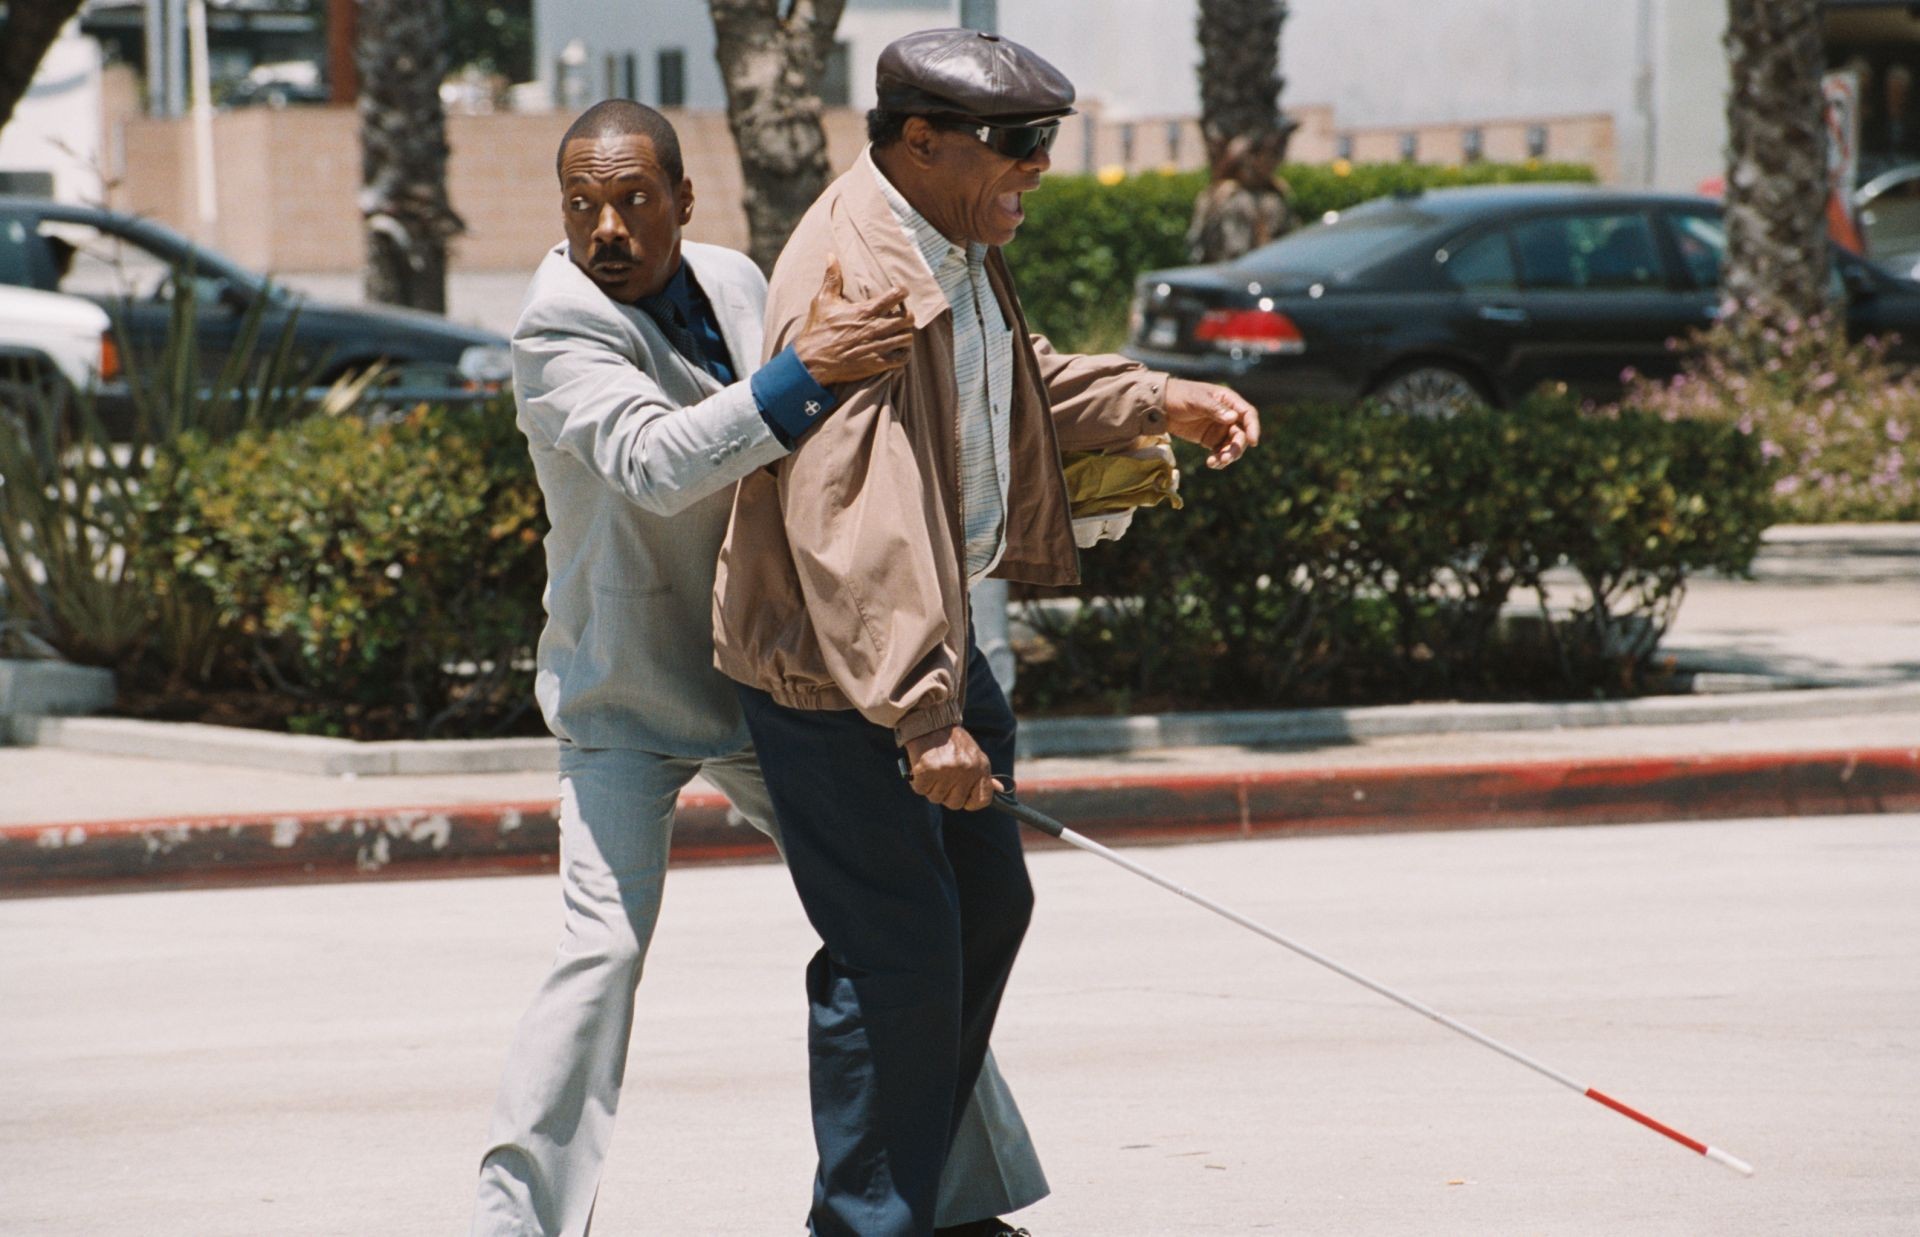 Eddie Murphy stars as Jack McCall and John Witherspoon stars as Blind Man in DreamWorks SKG's A Thousand Words (2012). Photo credit by Bruce McBroom.